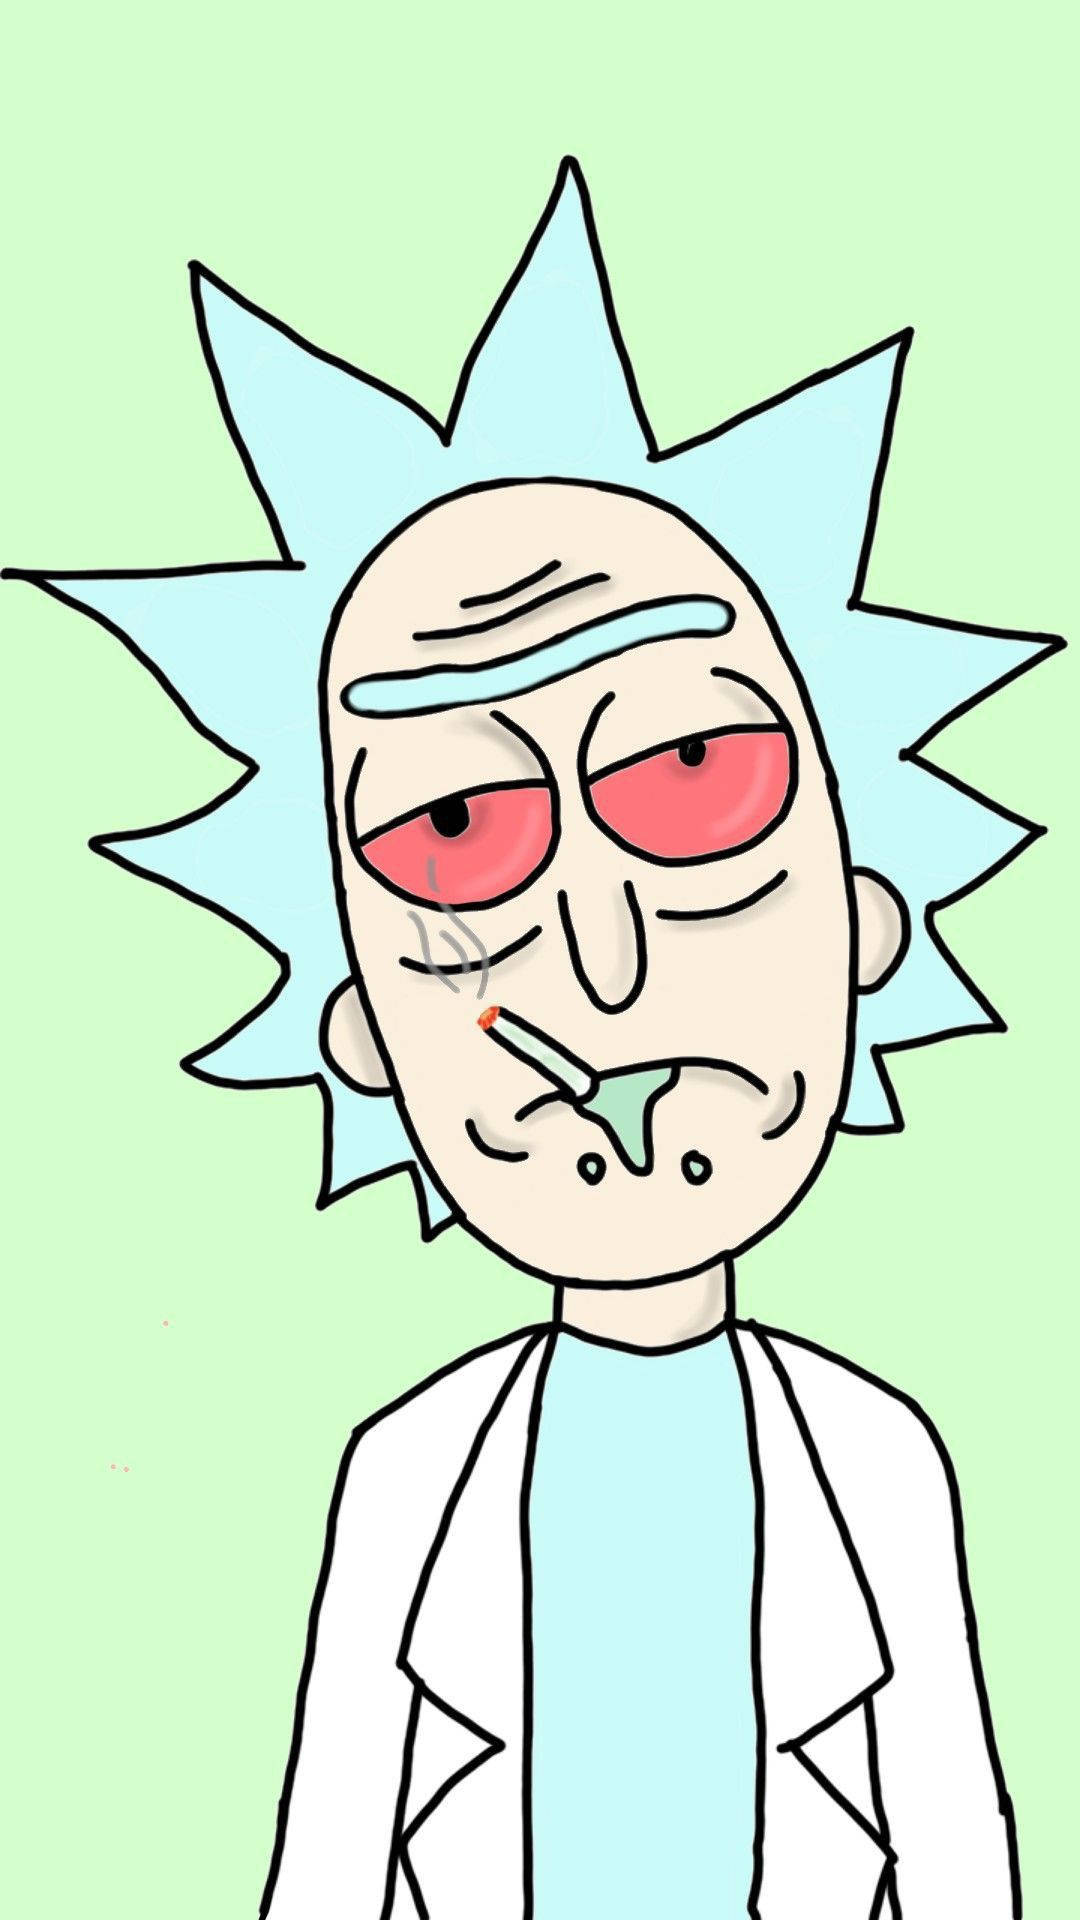 Get high with Rick and Morty! Wallpaper